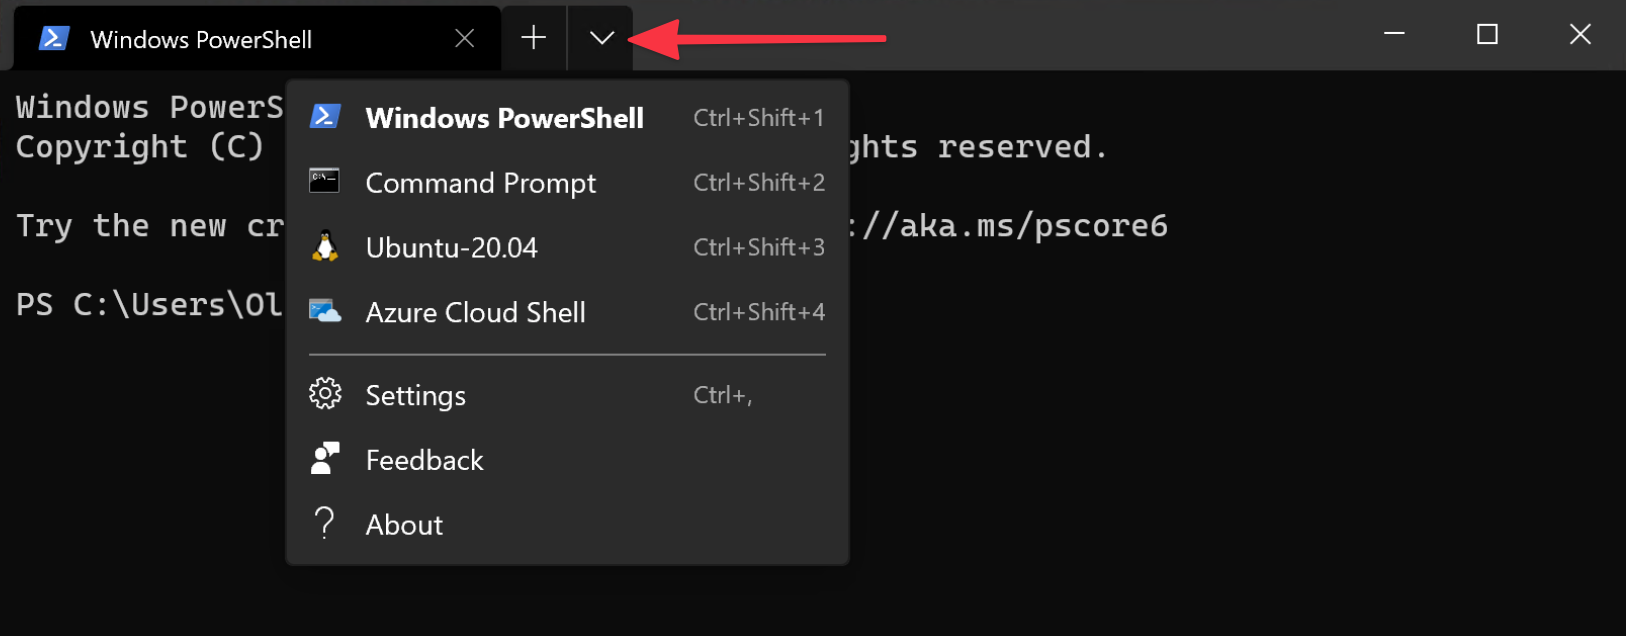 Dropdown menu for convenient shell selection in Windows Terminal